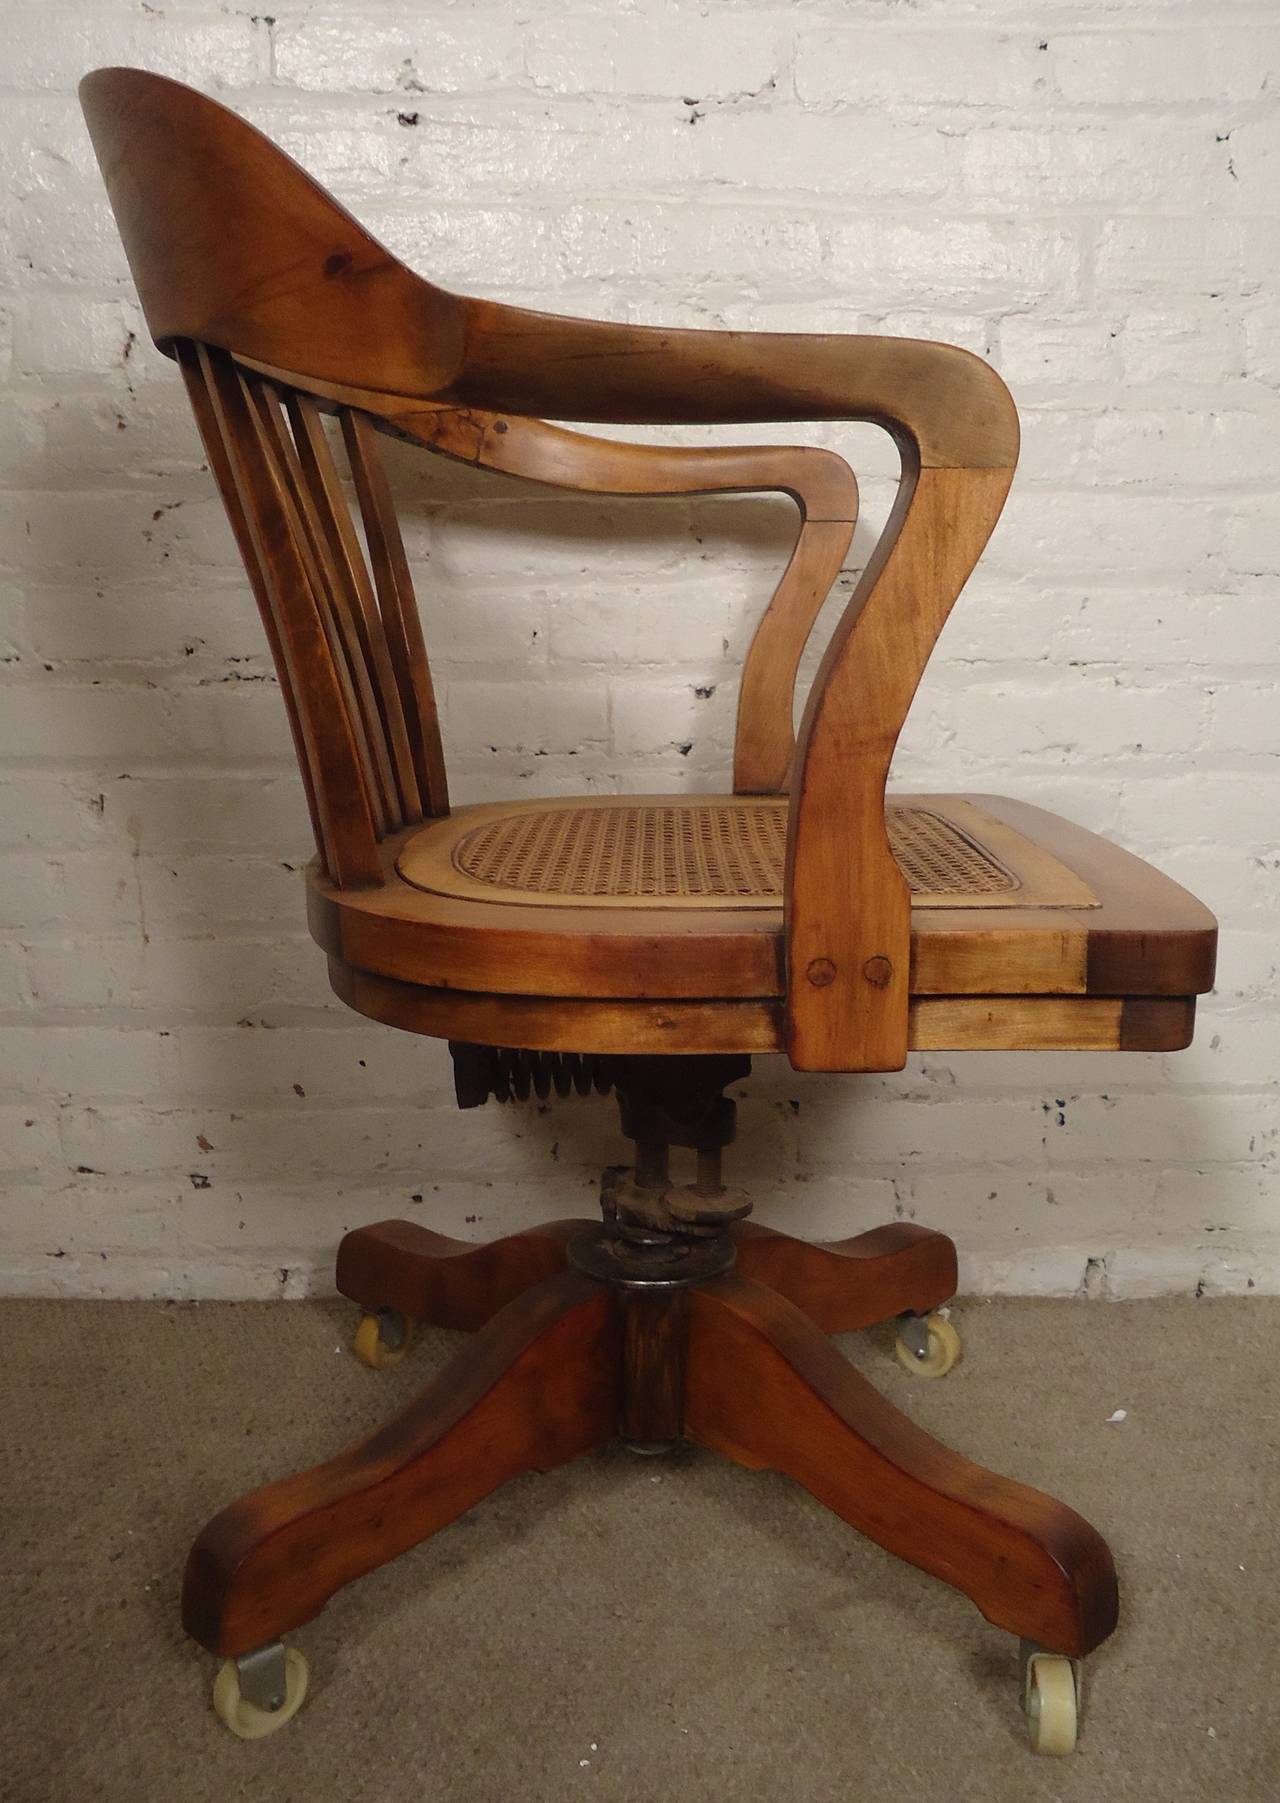 Intricately sculpted vintage-modern swivel desk chair, walnut with cane seat set on wheels. Very well made and newly refinished.
Manufactured by PAGE Business Furniture.

(Please confirm item location - NY or NJ - with dealer)